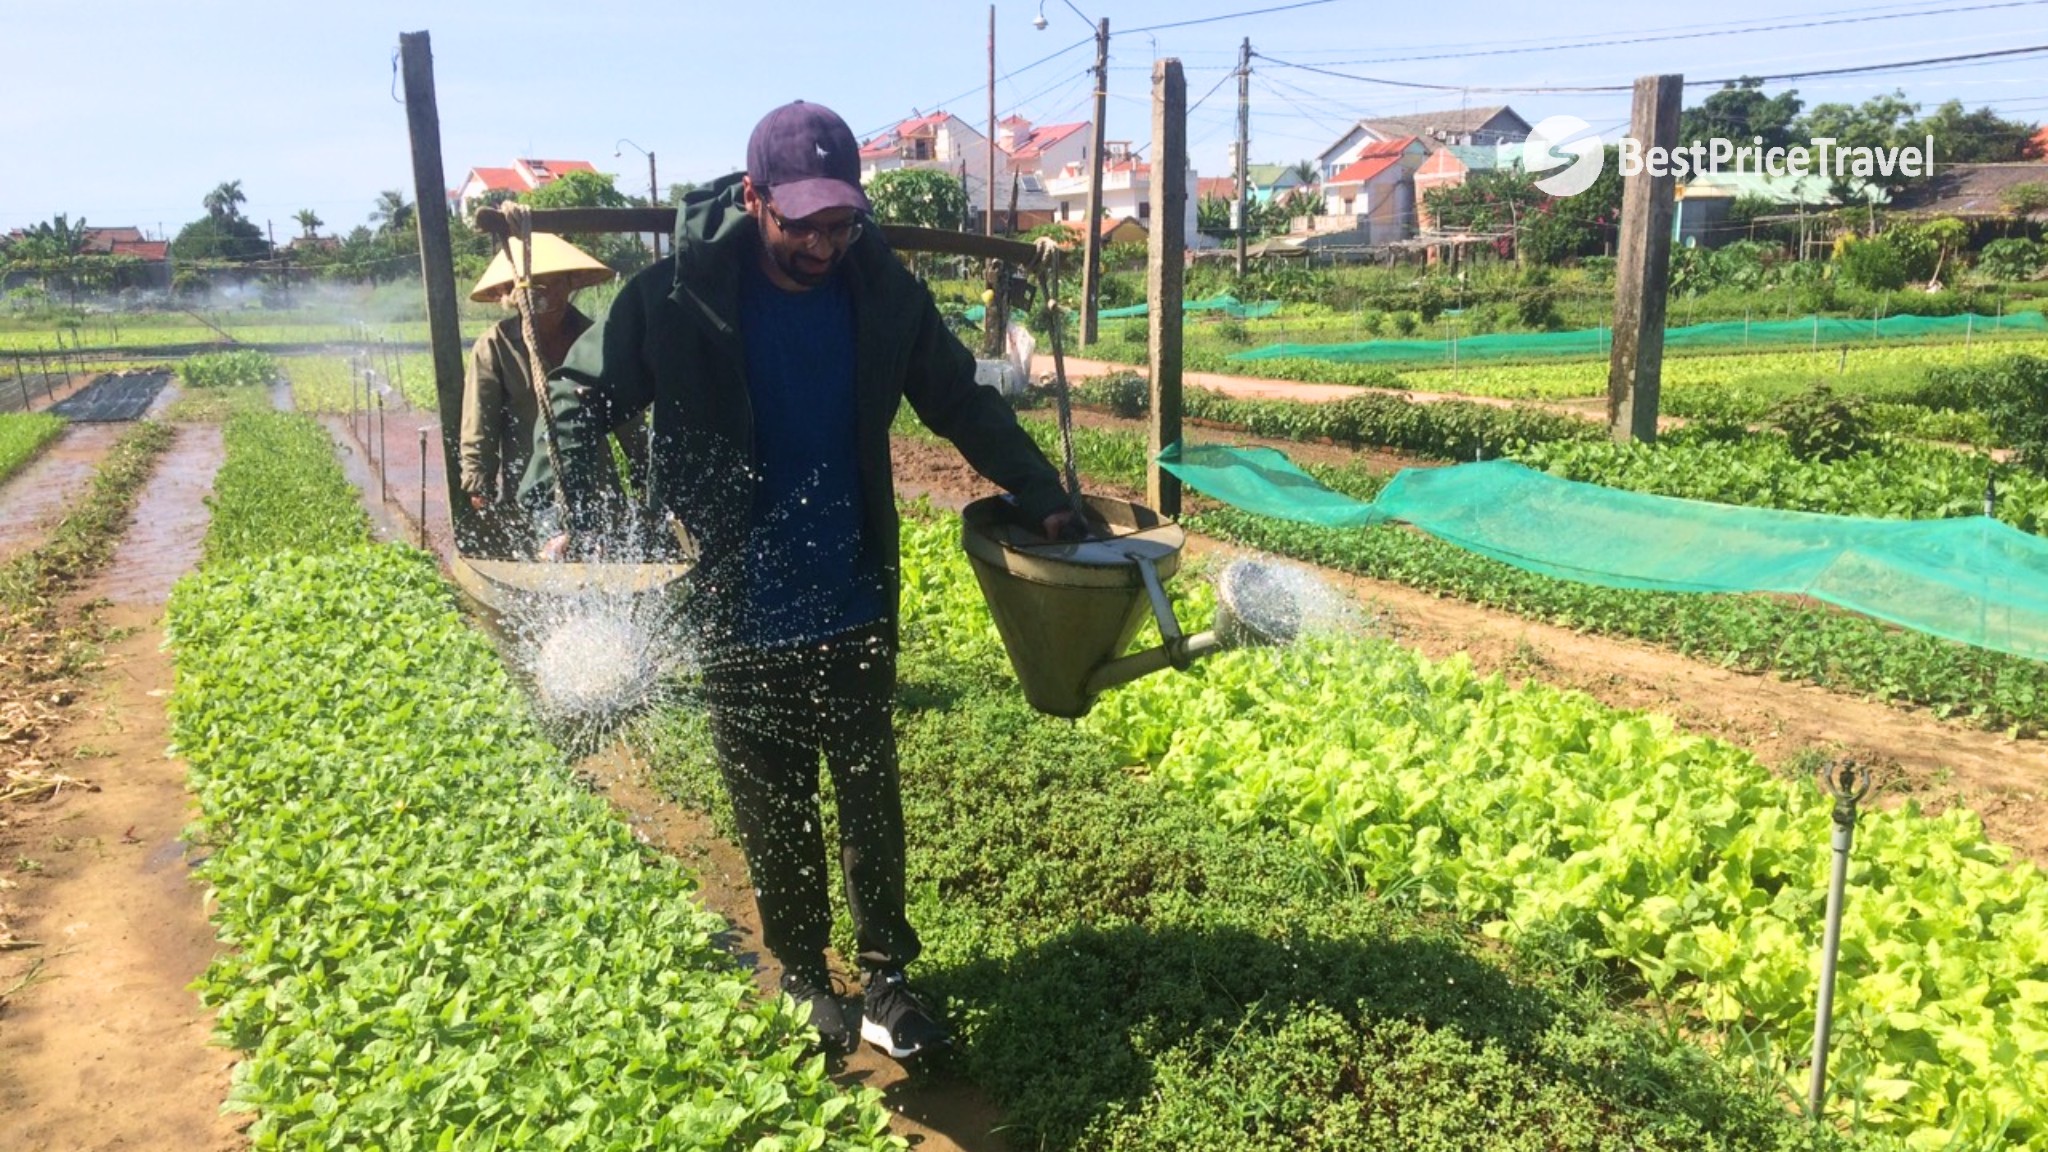 Day 3 Try Authentic Experience Of Local Farmers At Cam Thanh Ecological Village